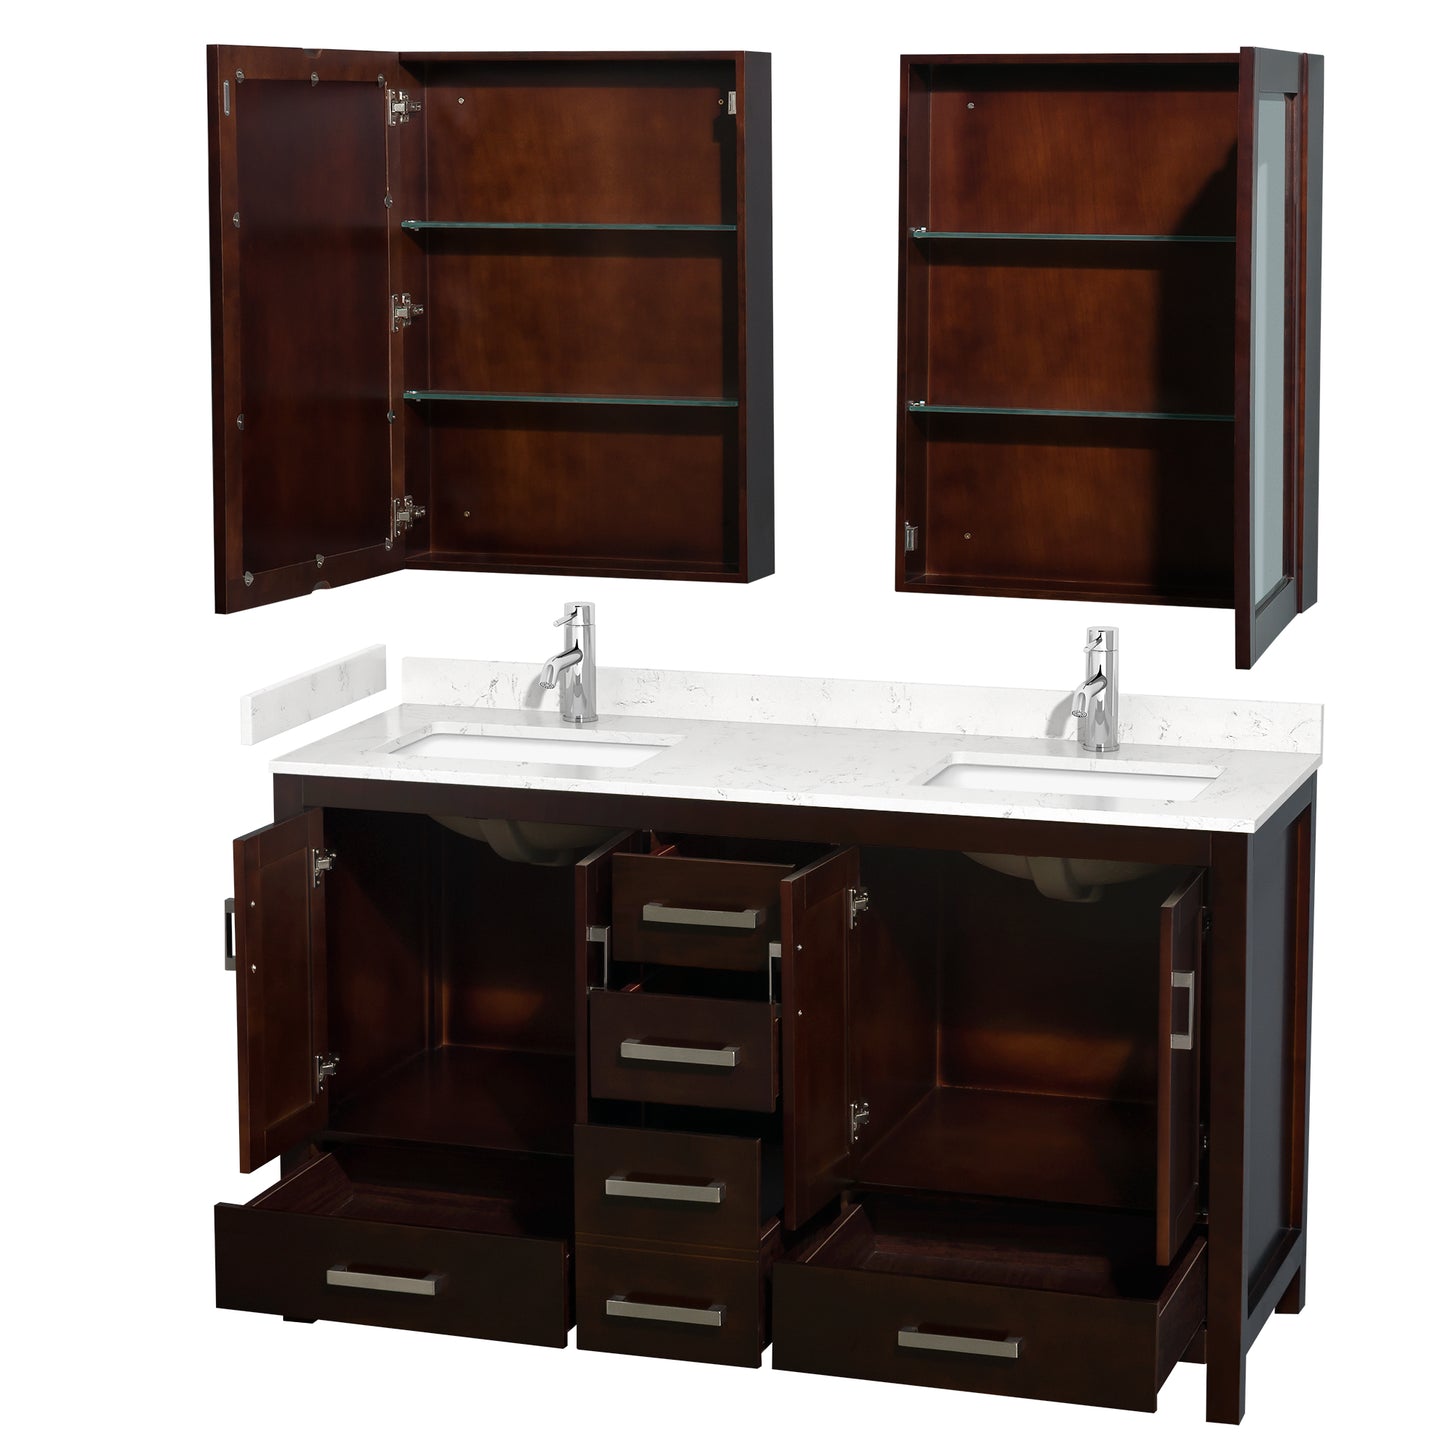 Wyndham Collection Sheffield 60 Inch Double Bathroom Vanity in Espresso, Marble Countertop, Undermount Square Sinks, 24 and 58 Inch Mirrors - Luxe Bathroom Vanities